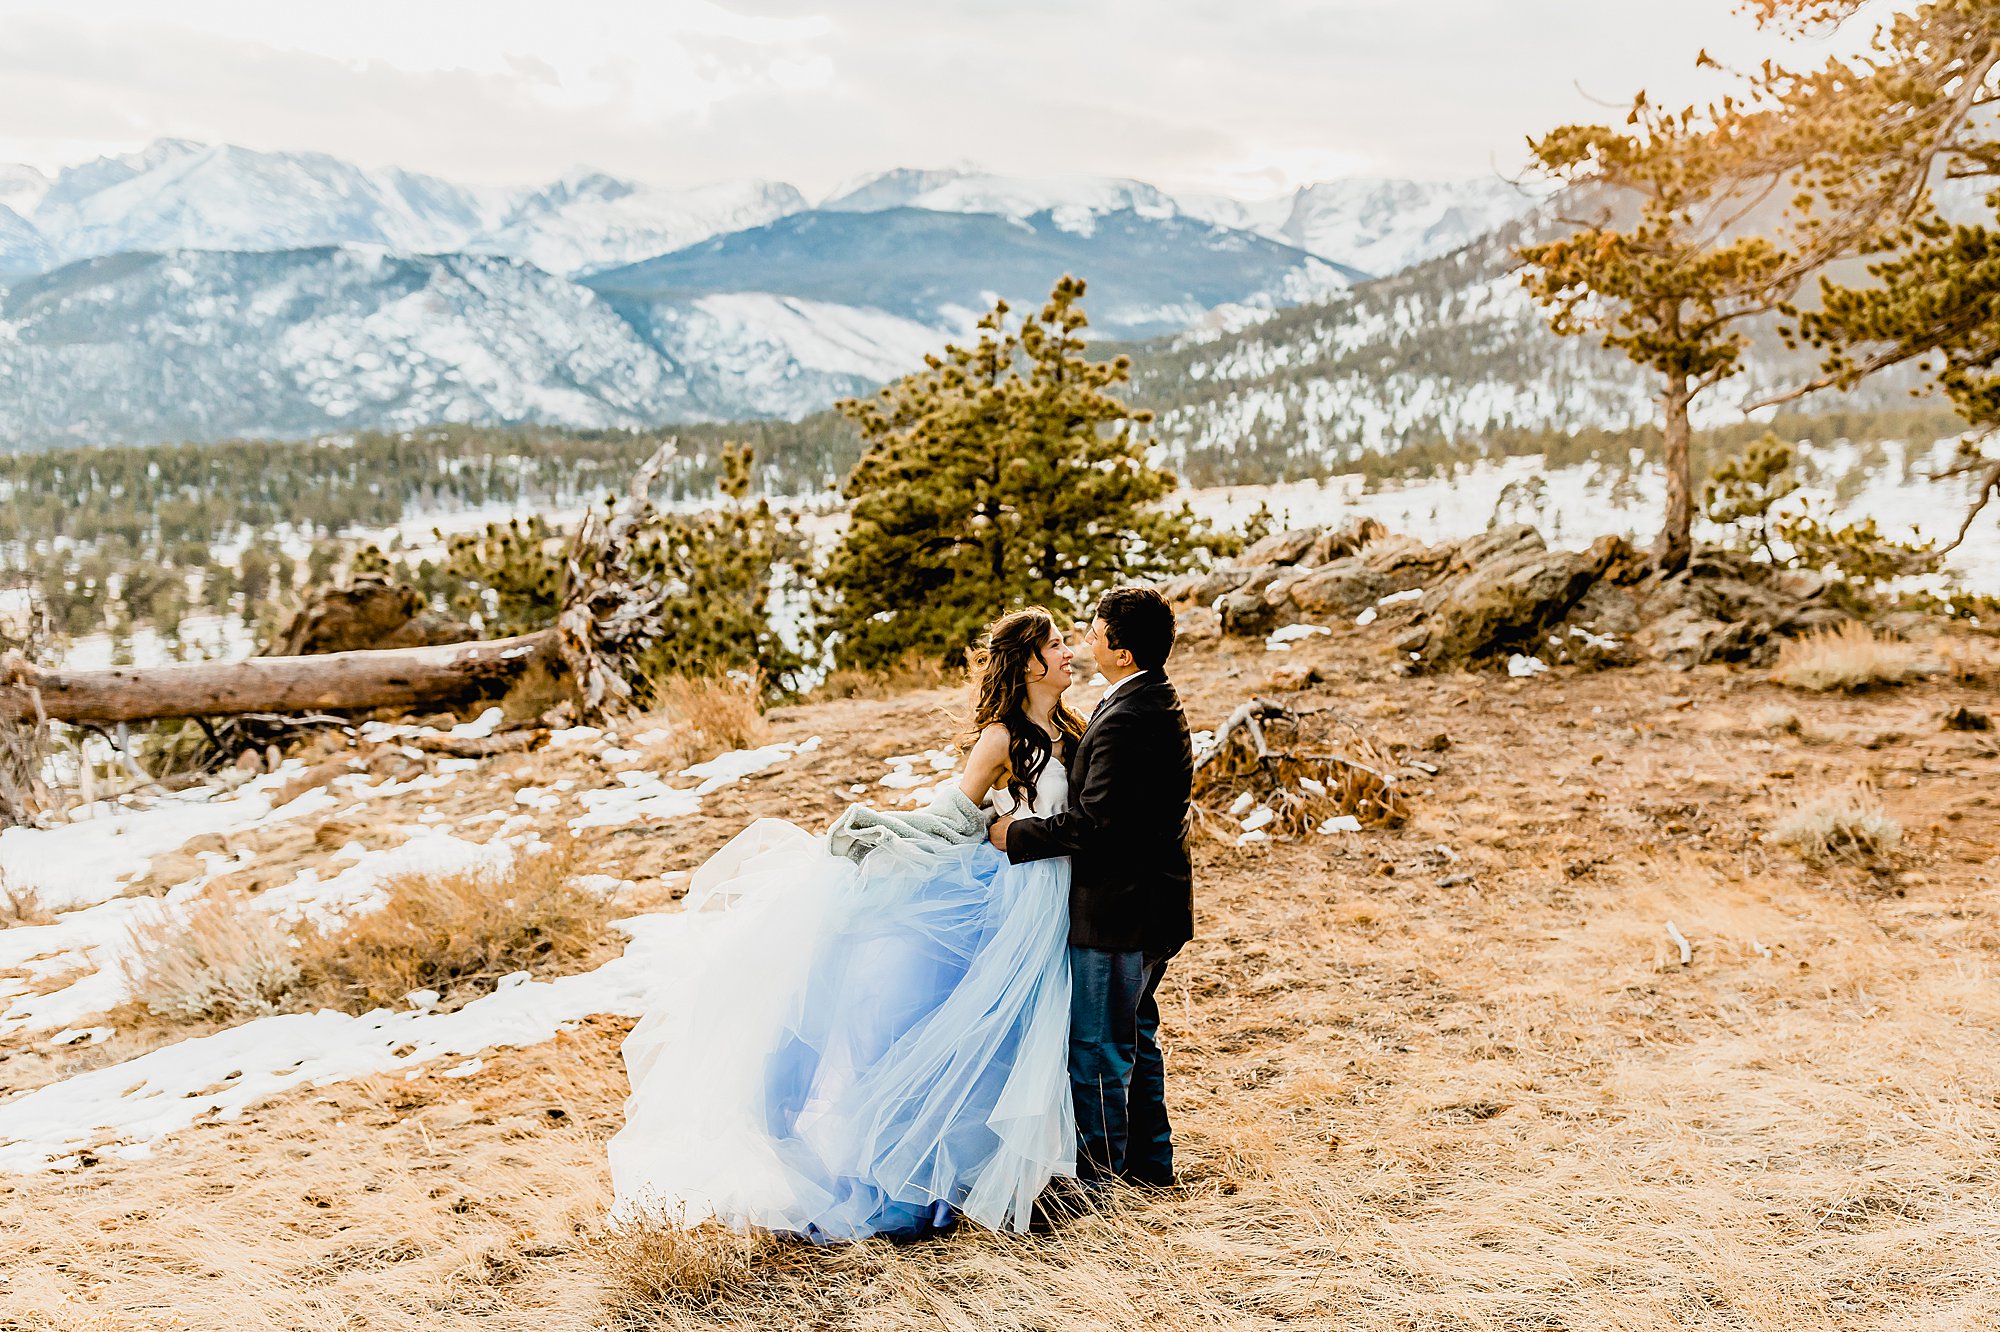 Couple explores rocky mountain national park for their winter elopement with gorgeous nature views surrounding them, photo by lauren casino photography